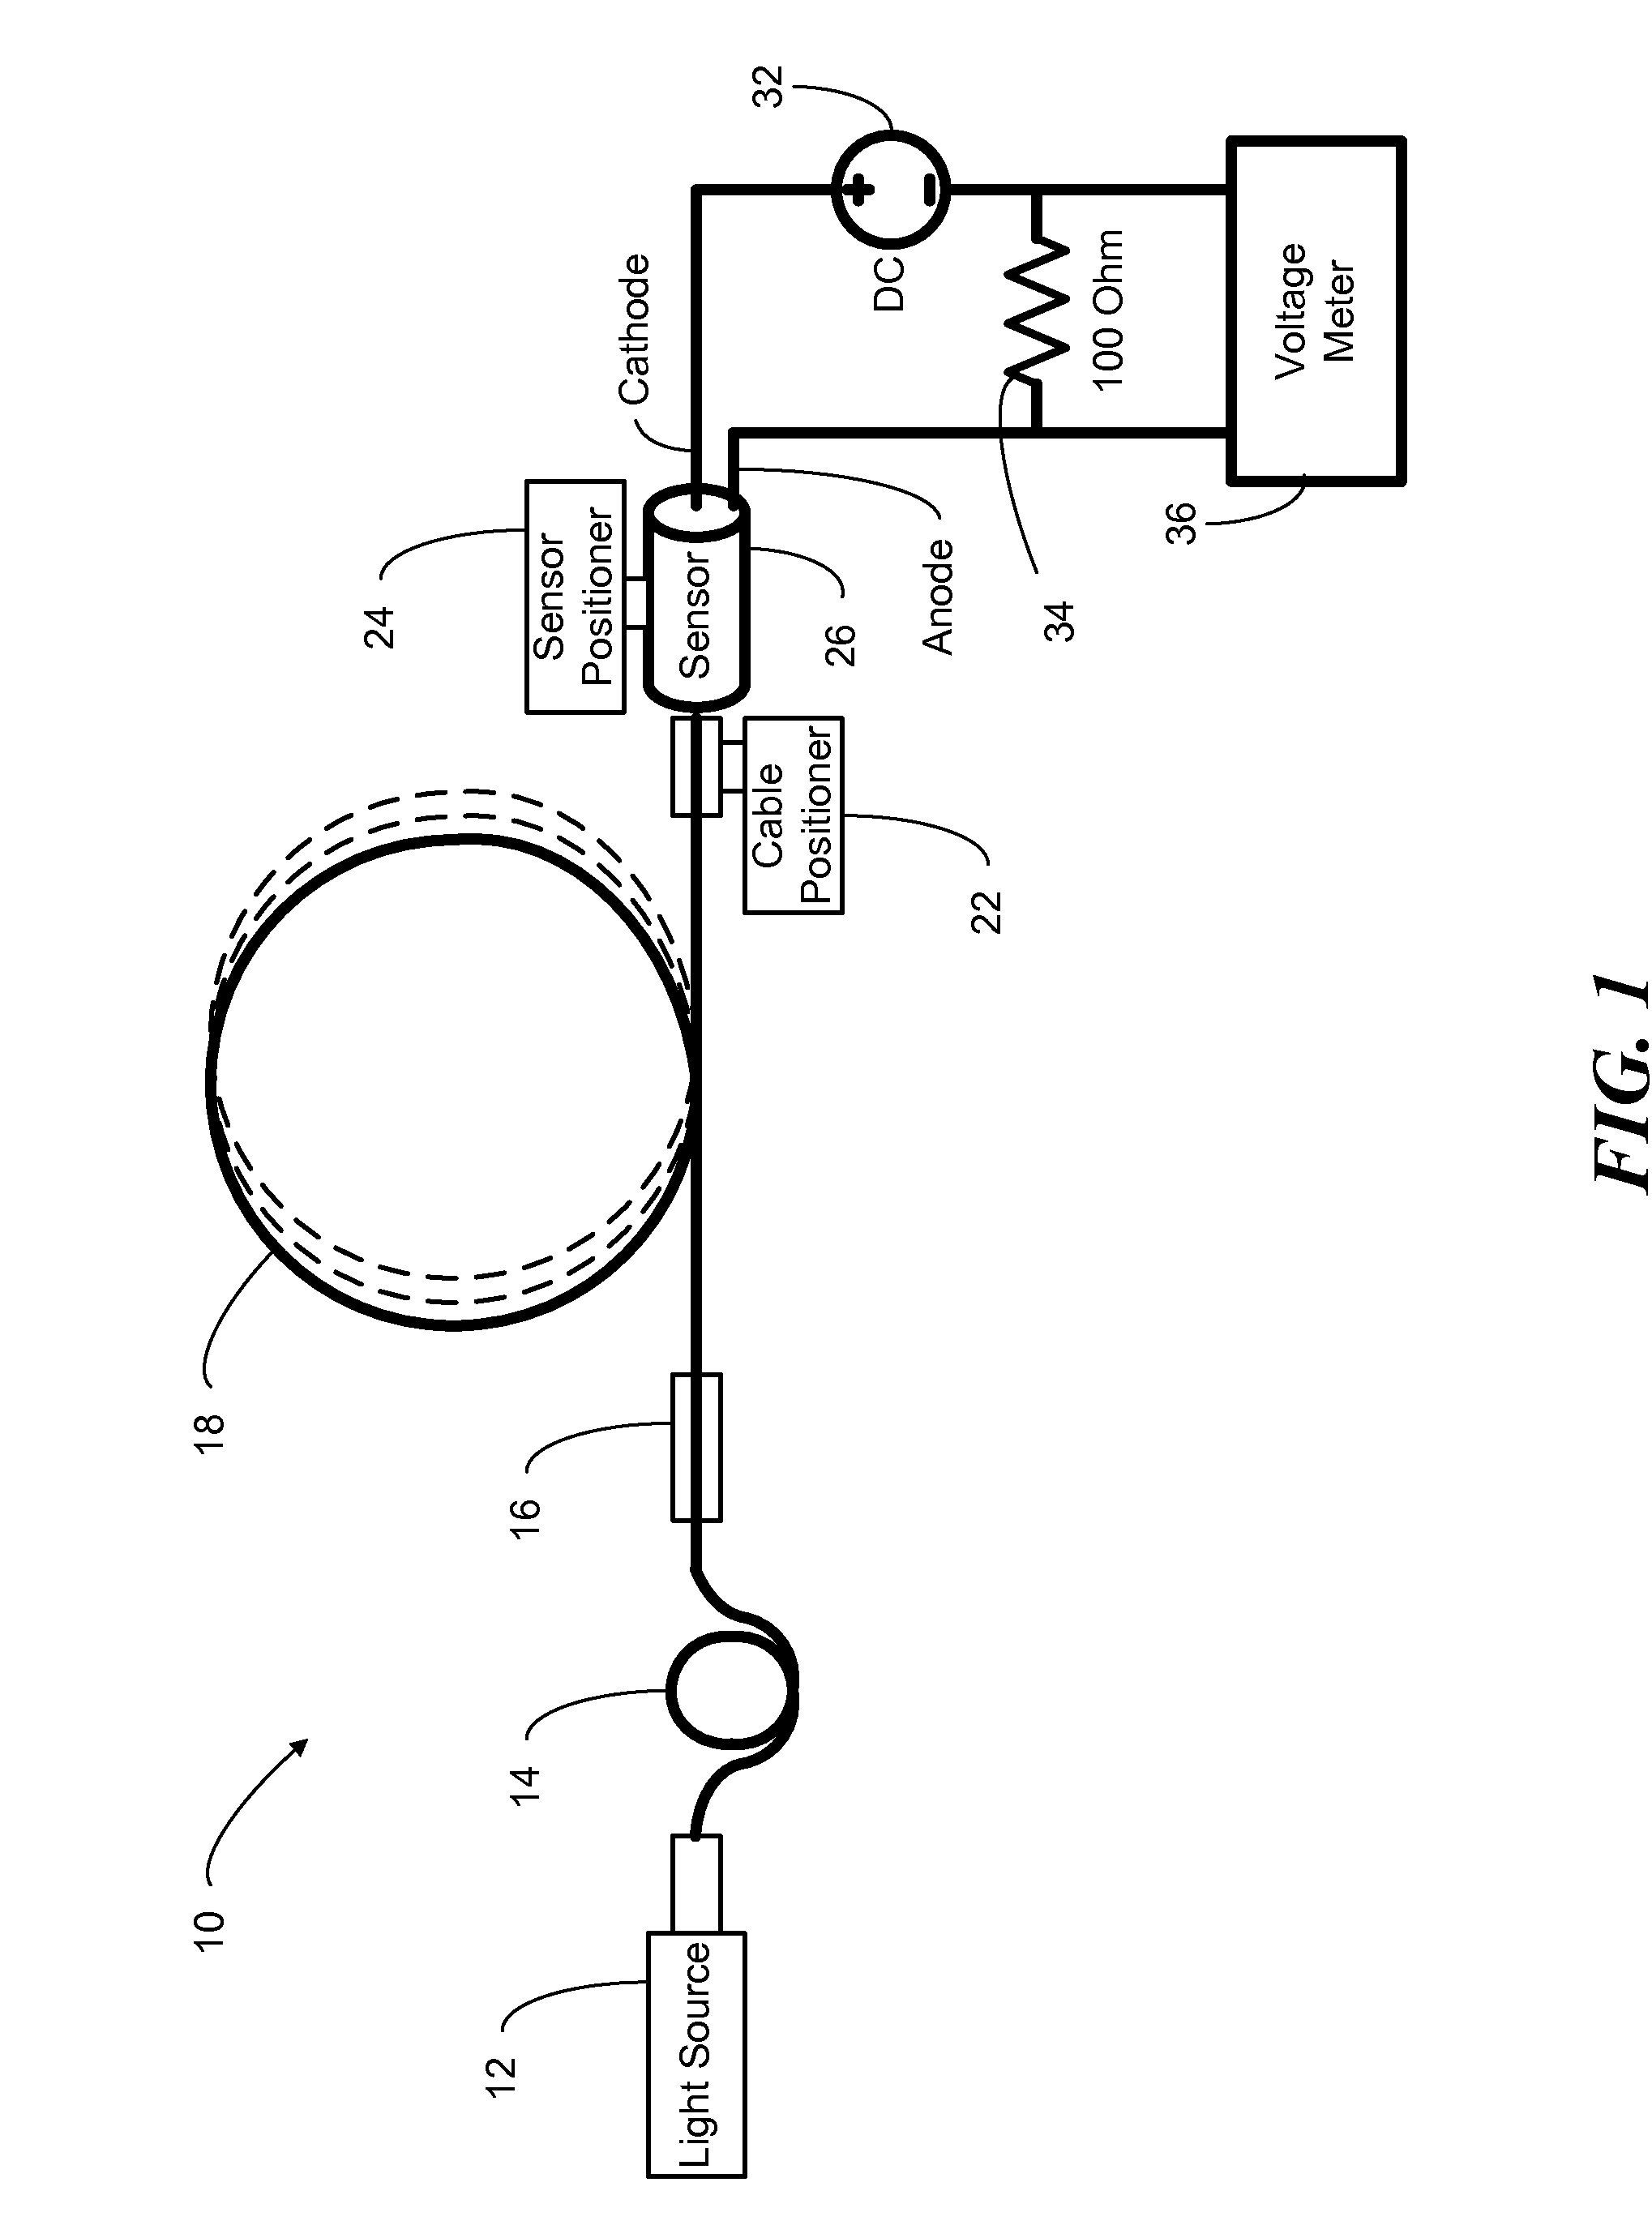 Method and System for Coupling Multimode Optical Fiber to an Optical Detector